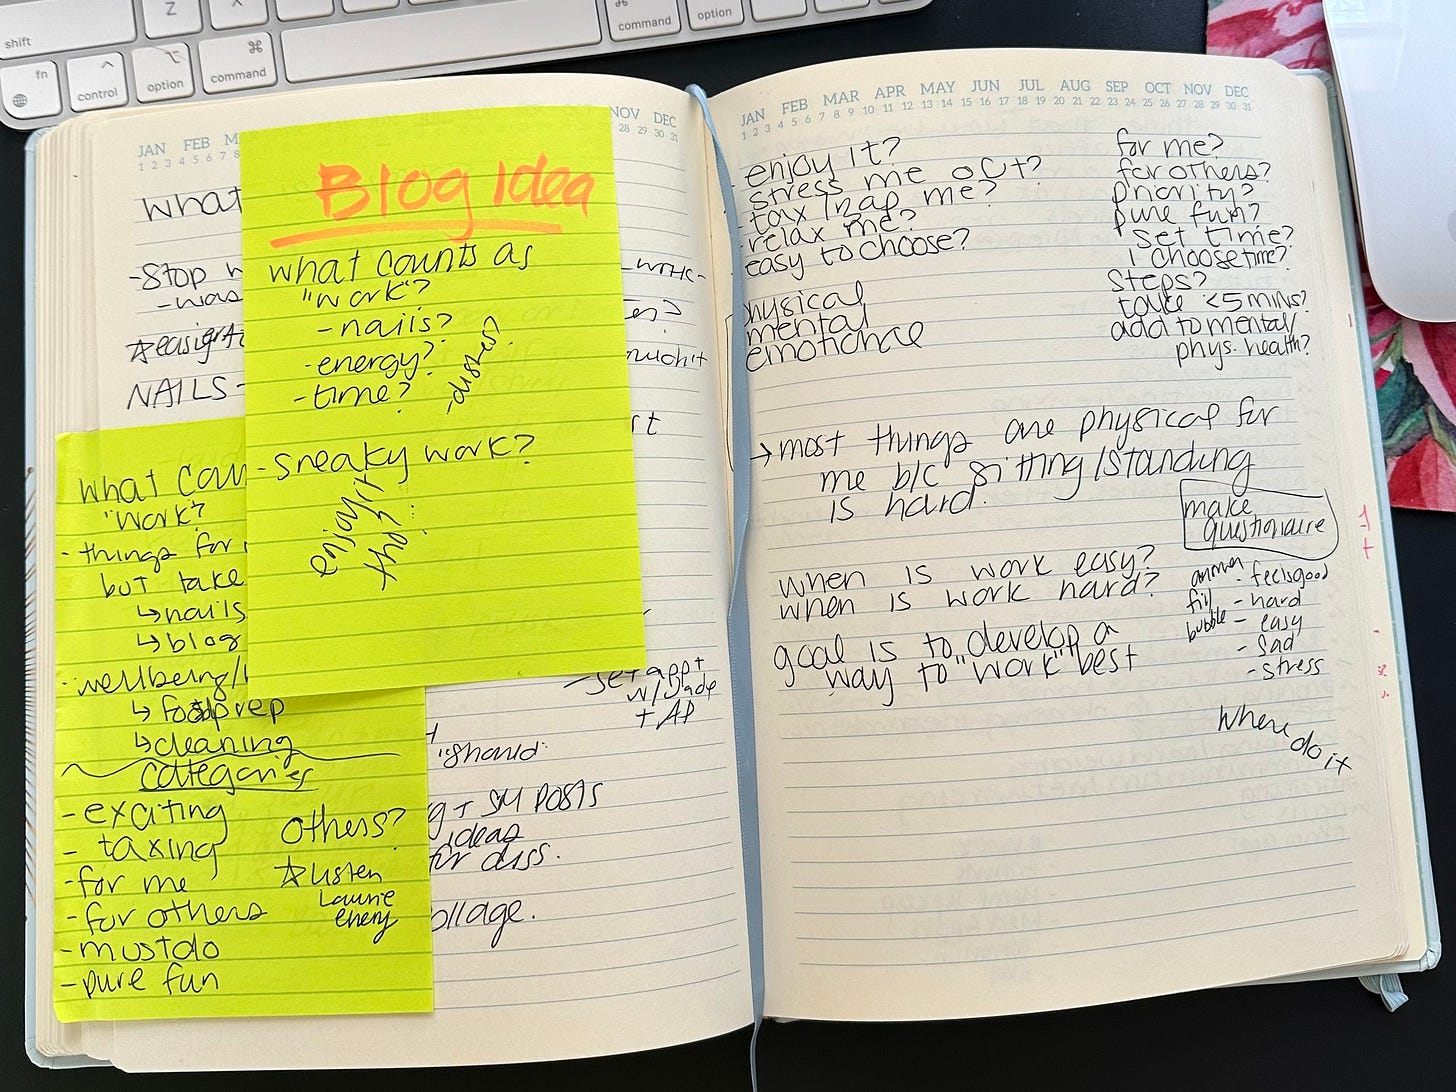 Image description: Kate's notebook for The Tending Year opened to a page she wrote in 2018 about a blog idea on what counts as work.